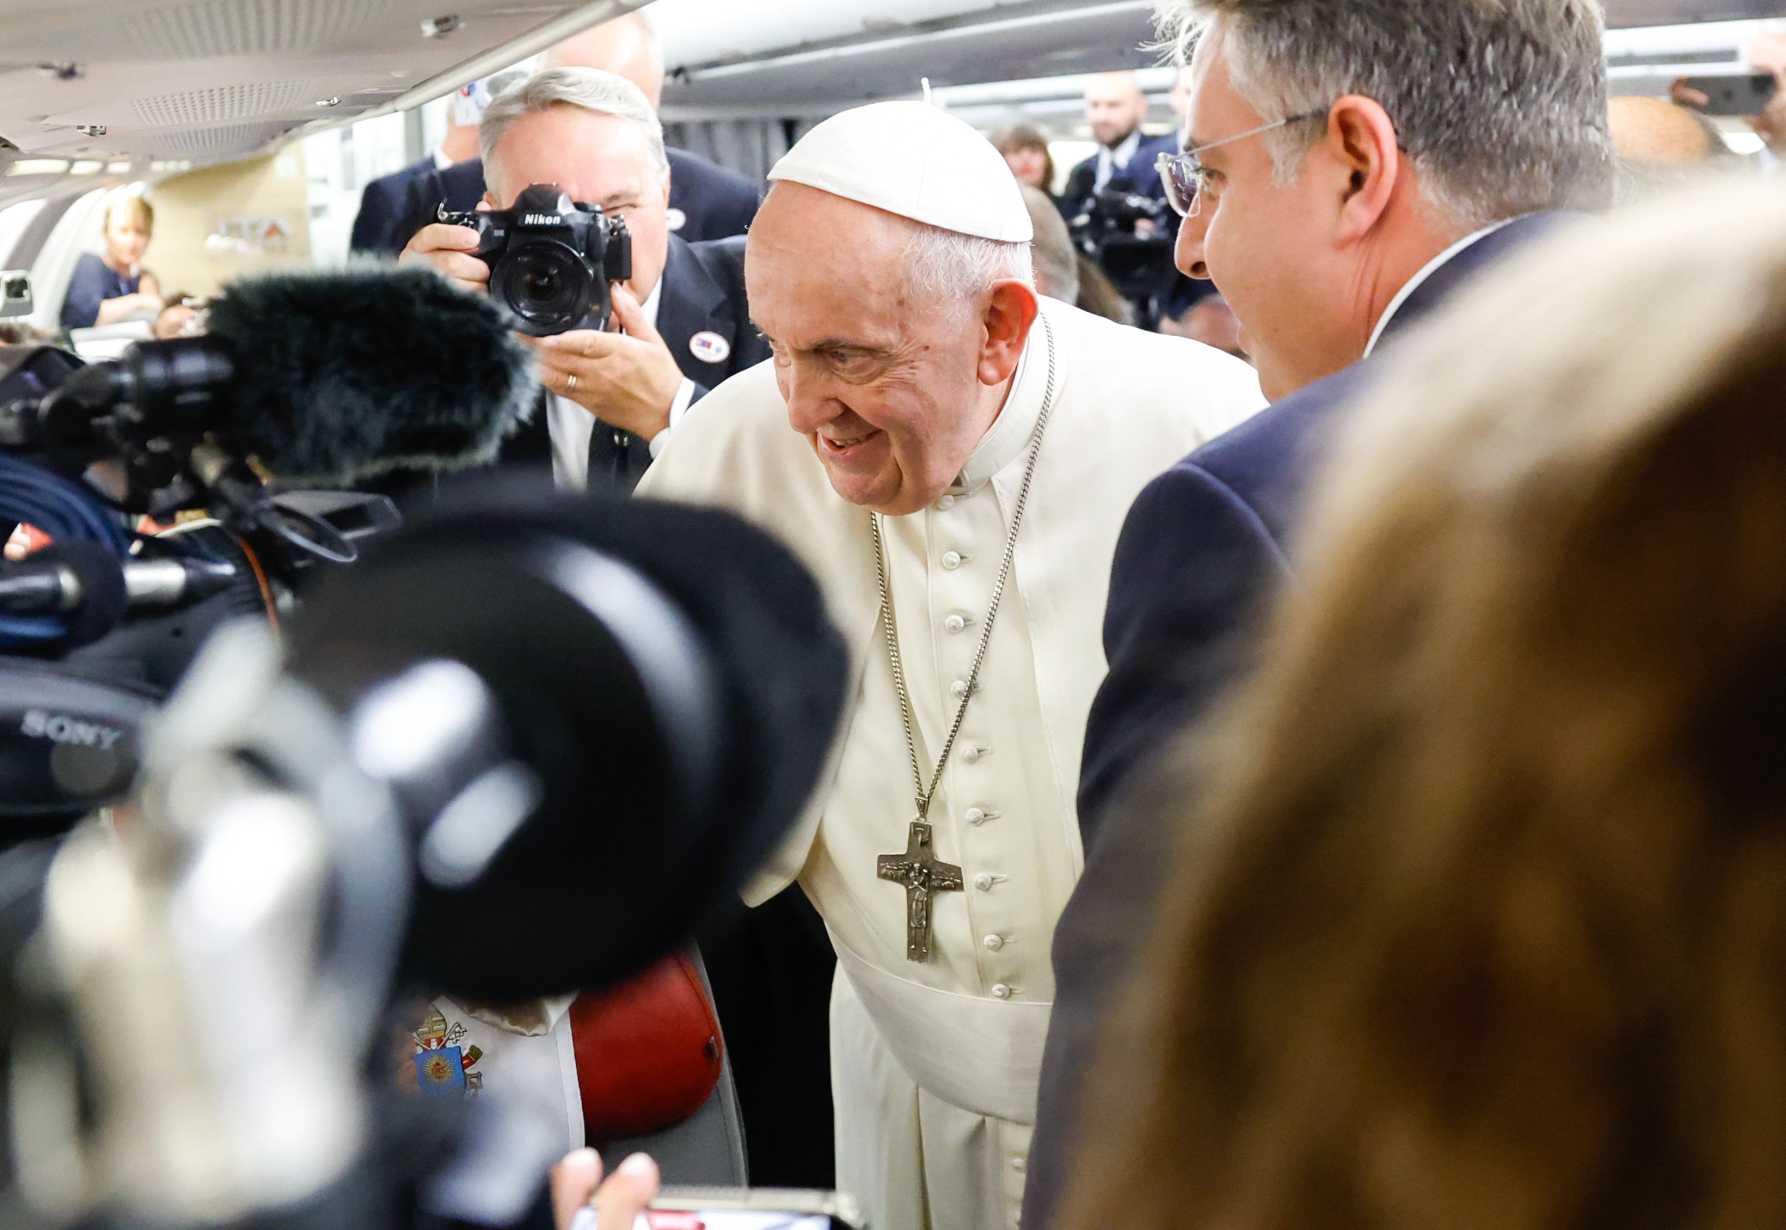 Catholics working in media can de-escalate today's war of words, pope says